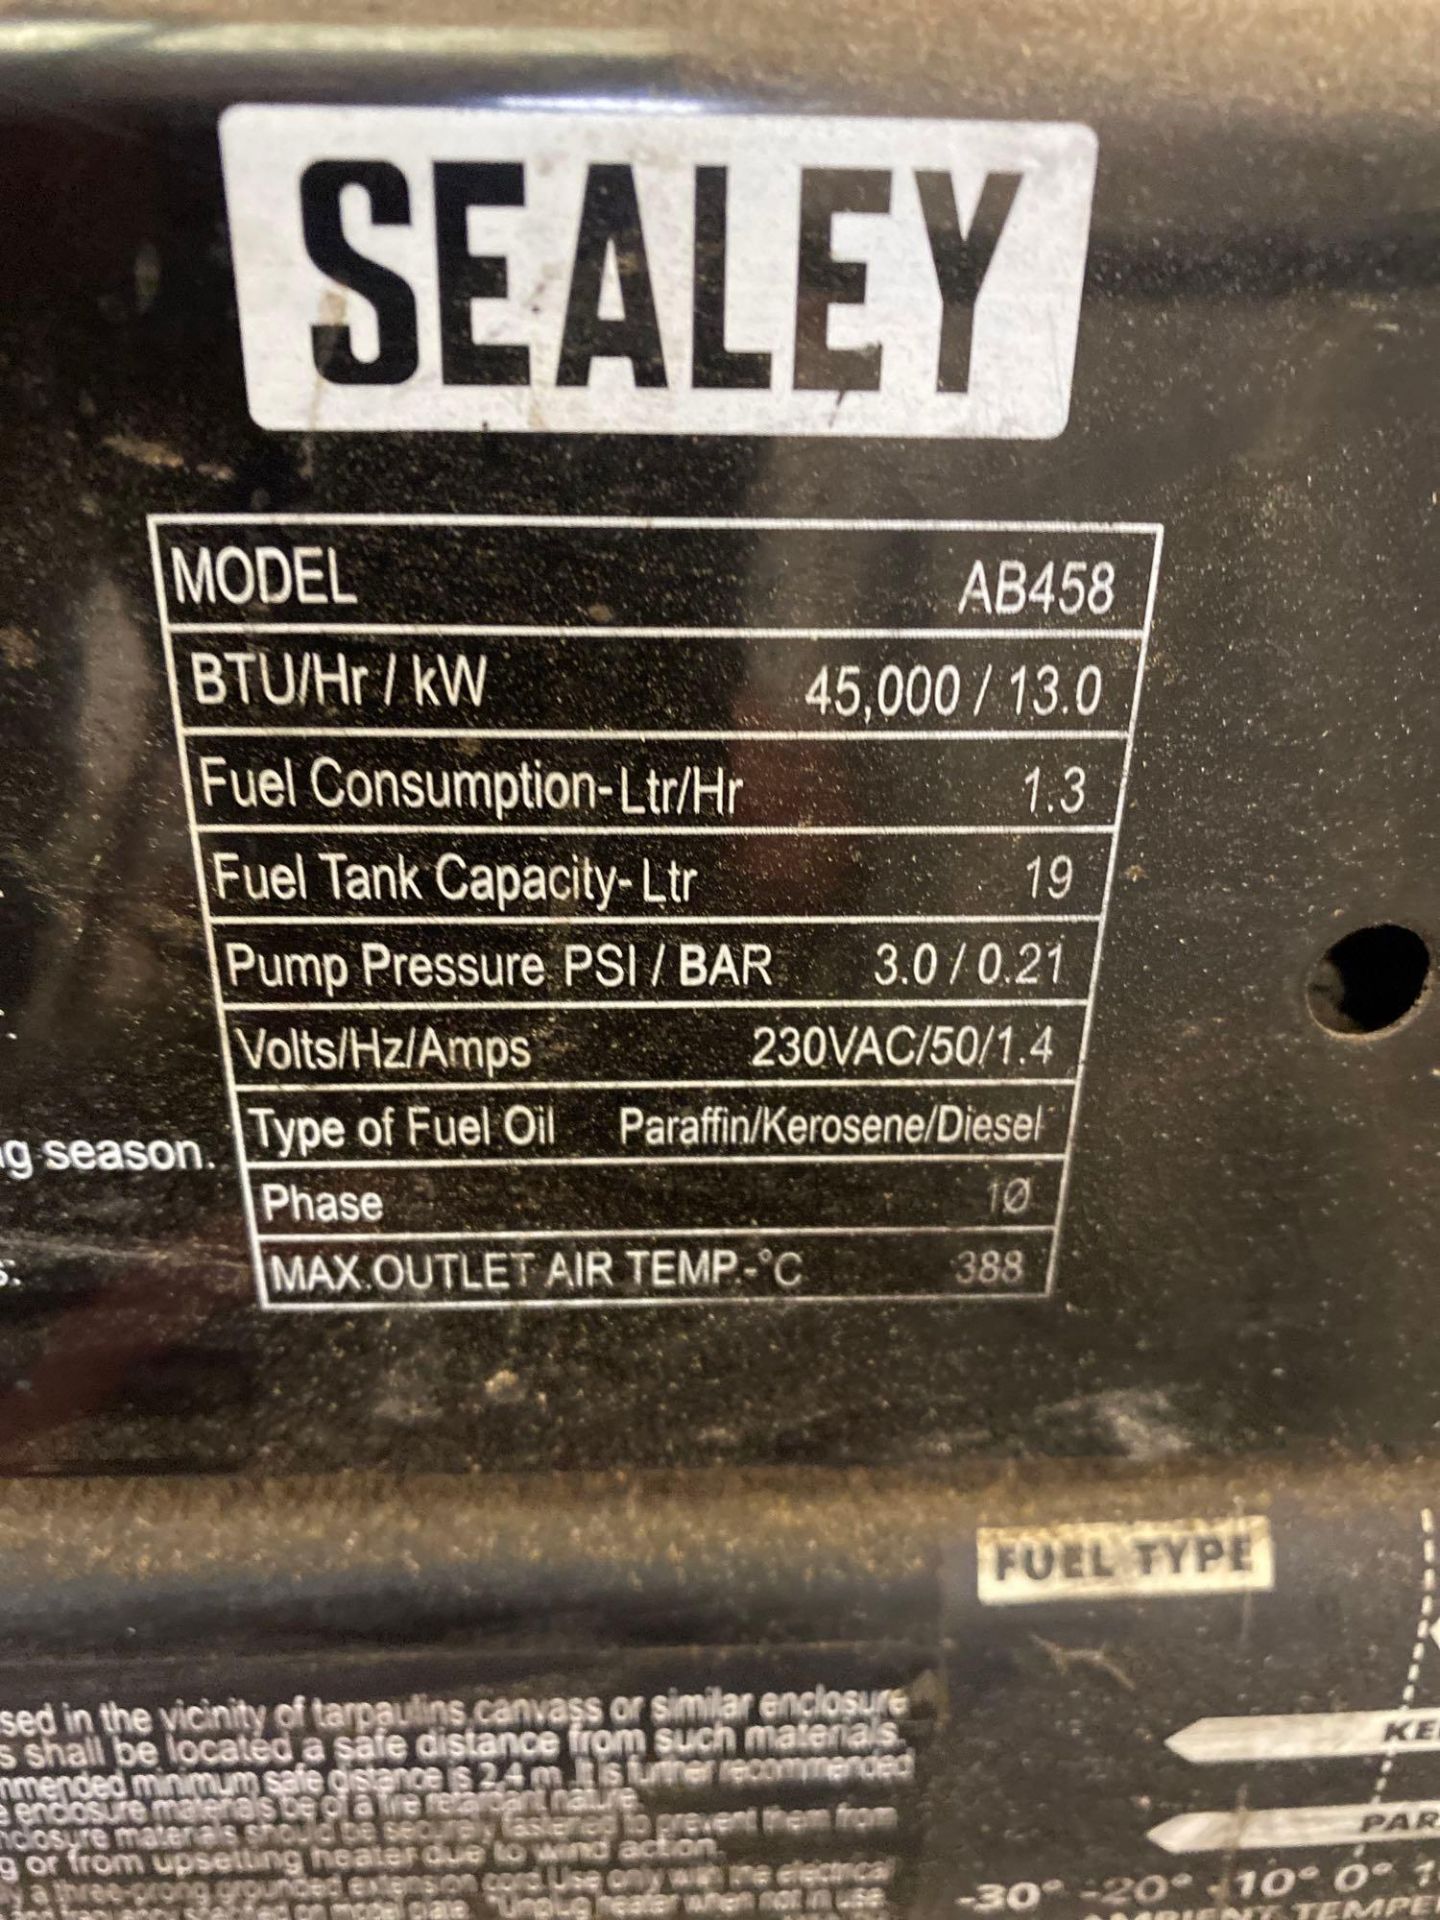 Sealy space warmer model AB458 - Image 3 of 3